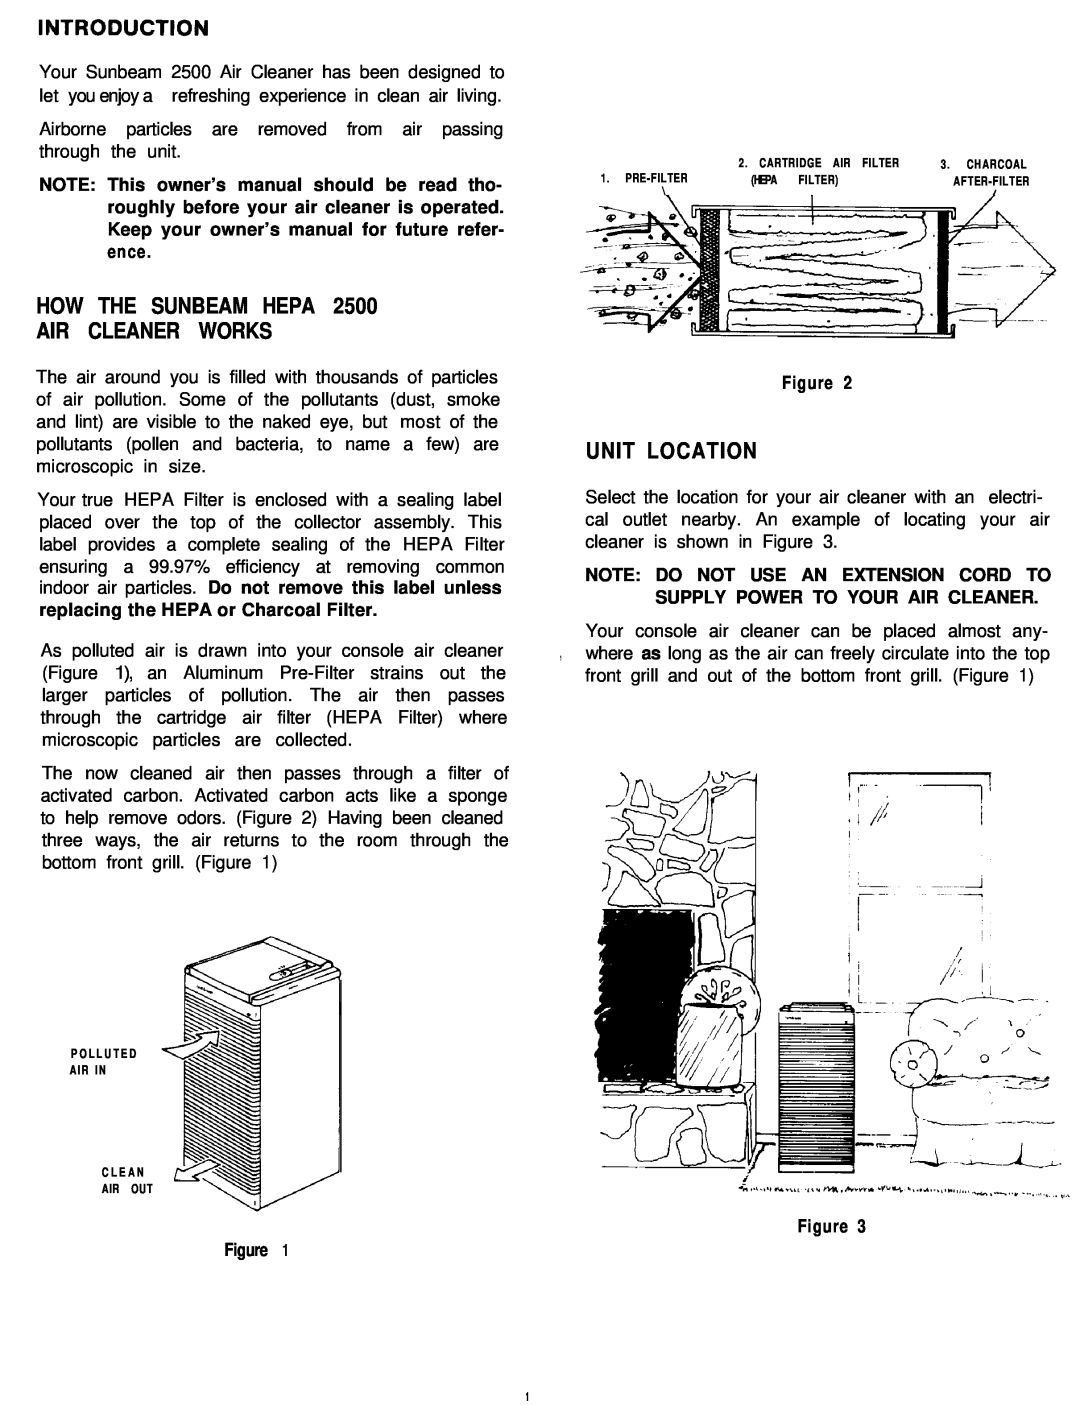 Sunbeam 2576 How The Sunbeam Hepa Air Cleaner Works, Unit Location, Note Do Not Use An Extension Cord To, Figure Figure 